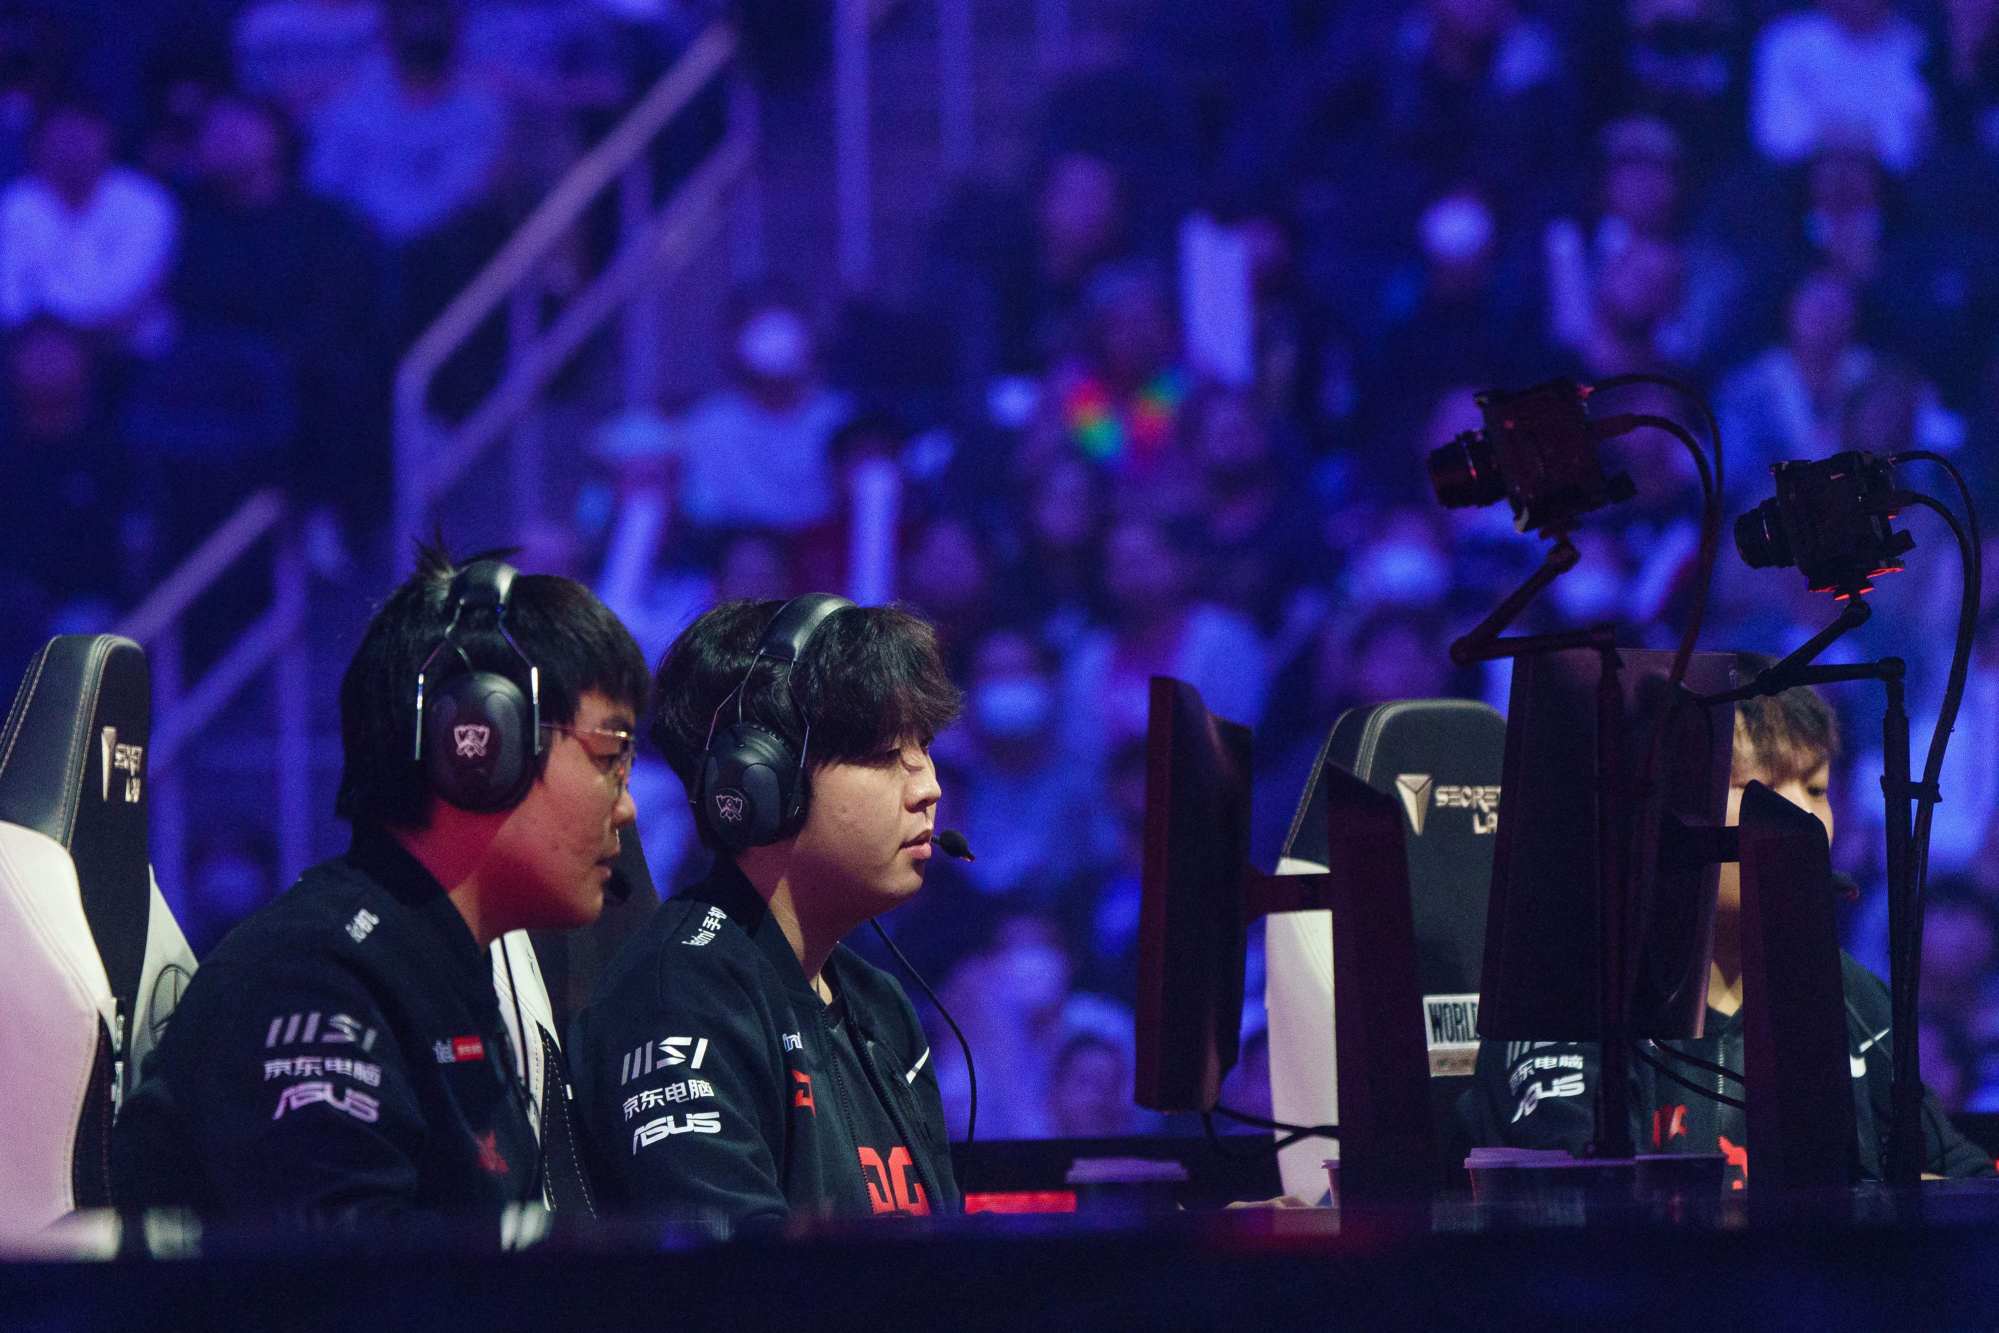 Members of the JD Gaming team are seen at their match against South Korea’s T1 during the League of Legends World Championship semi-finals held at State Farm Arena in Atlanta, Georgia on October 29, 2022. Photo: Agence France-Presse